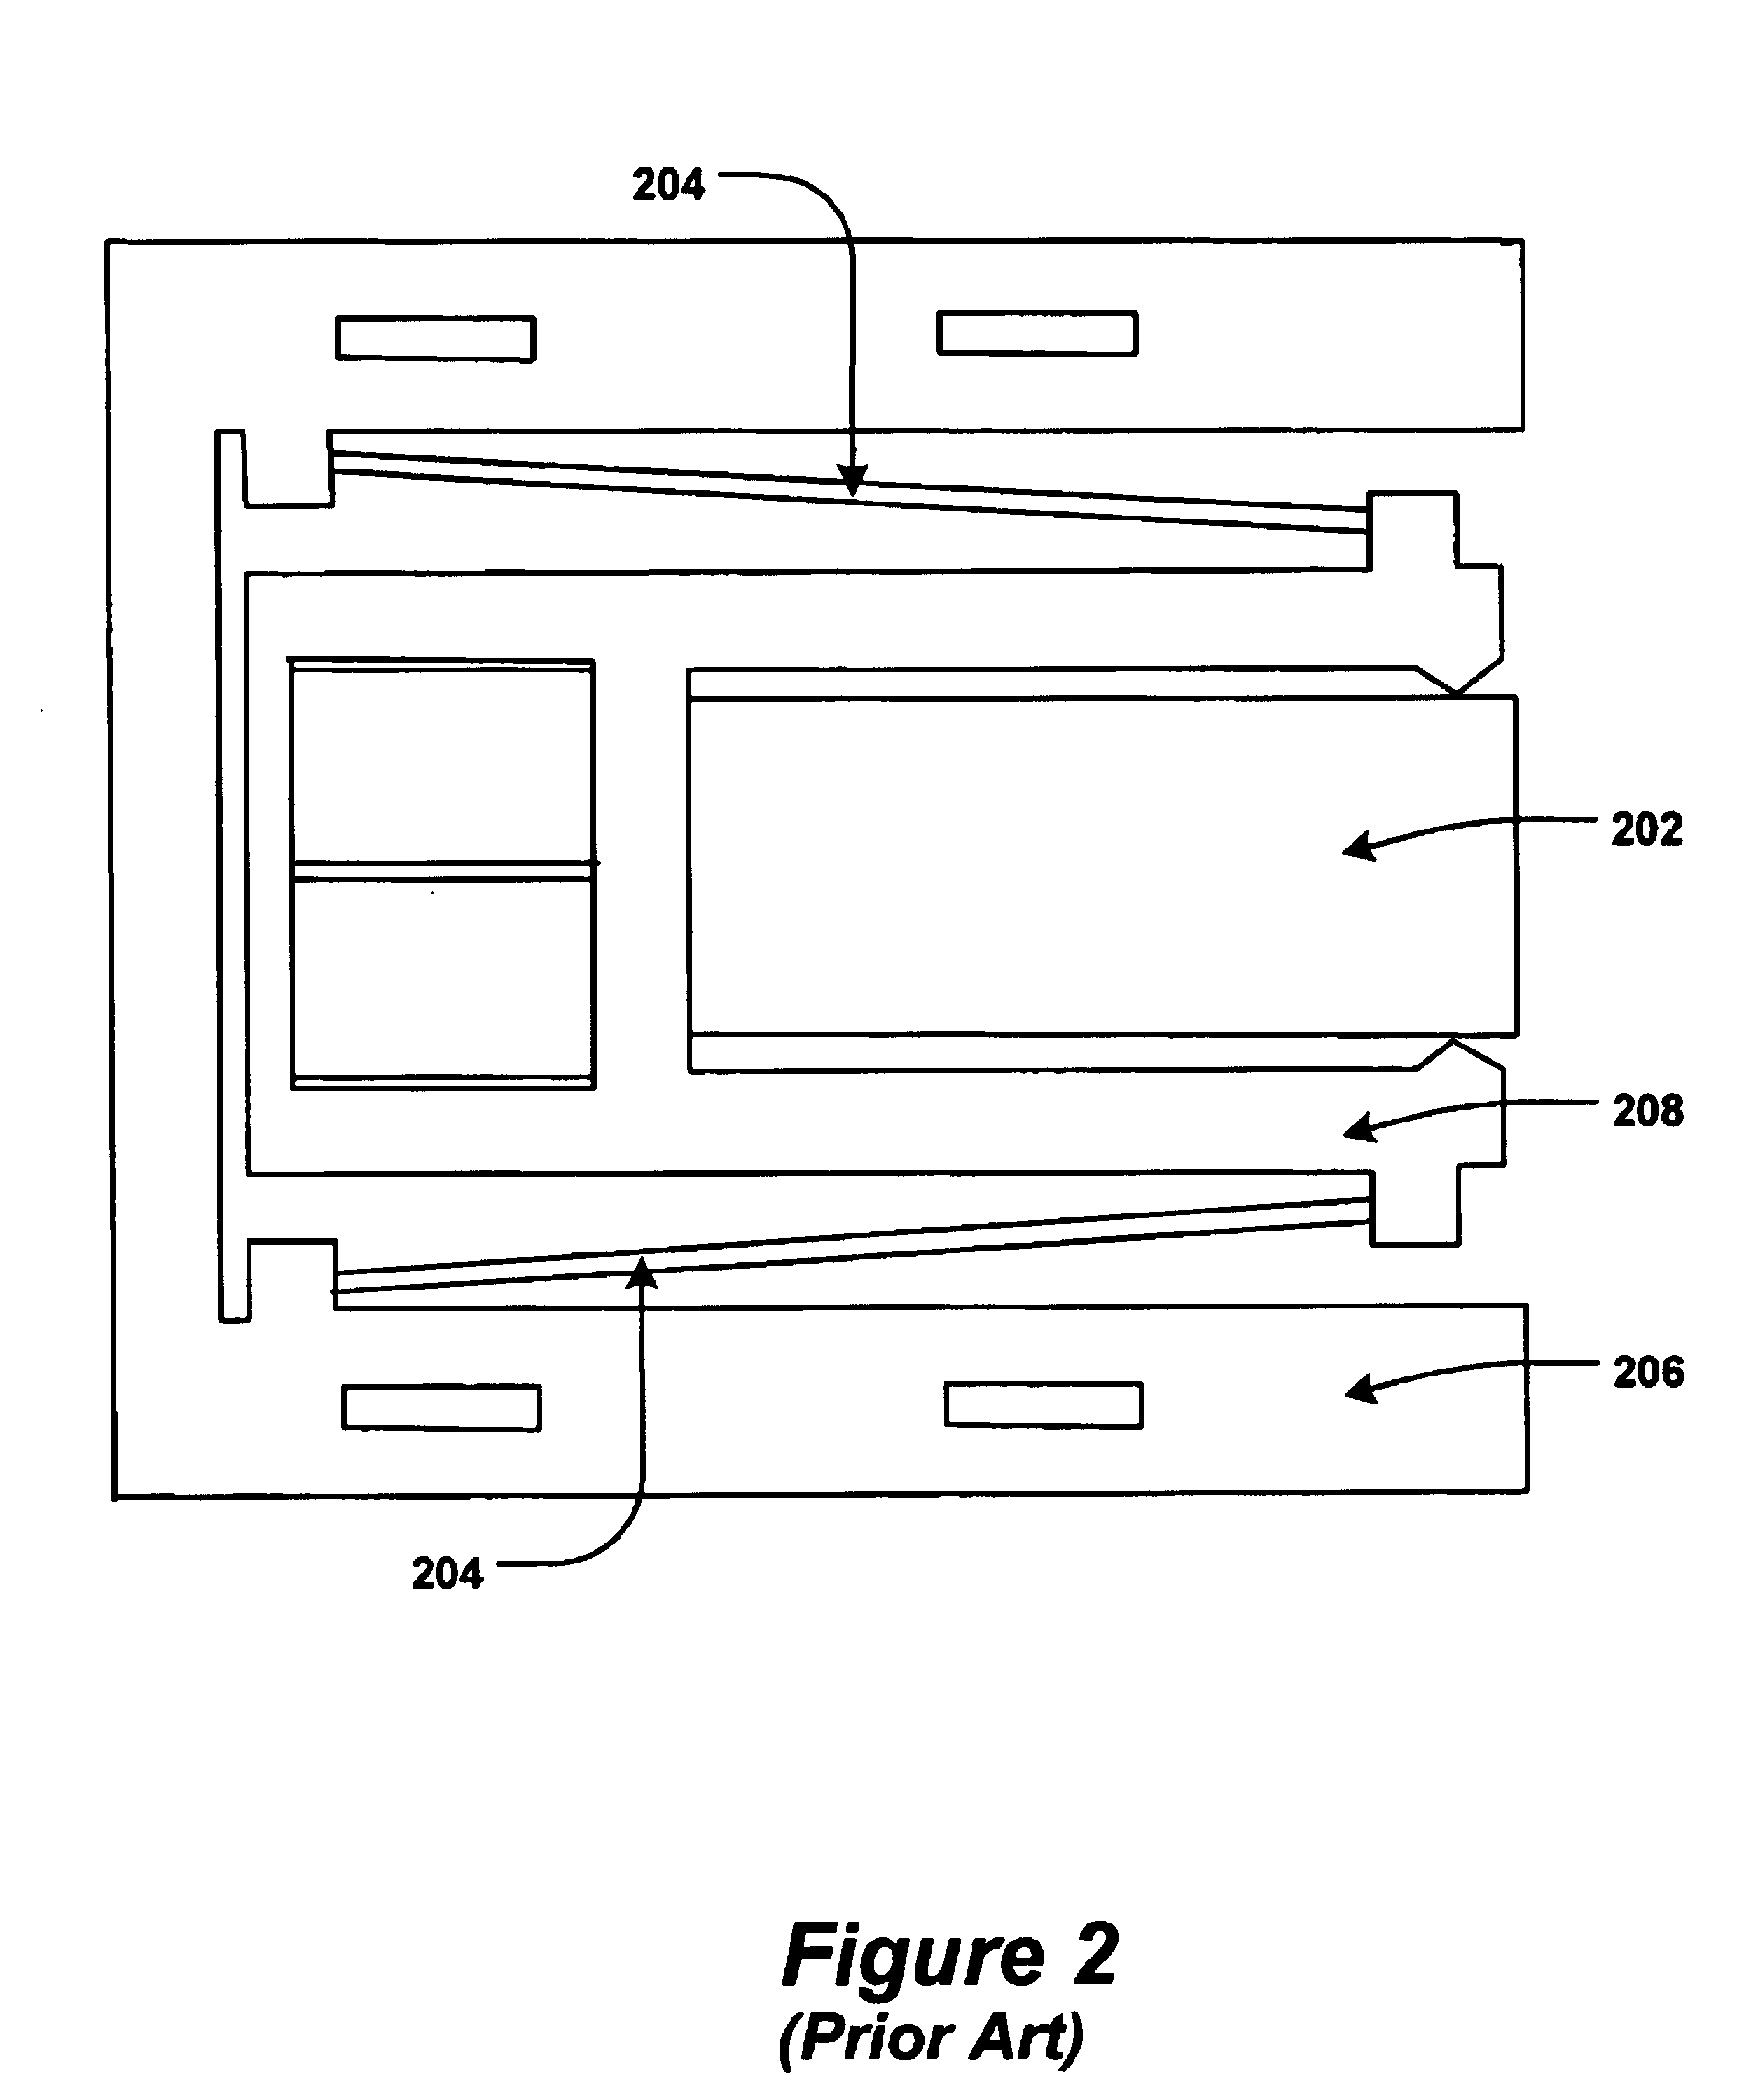 Collocated metal frame PZT micro-actuator with a lower stiffness suspension design